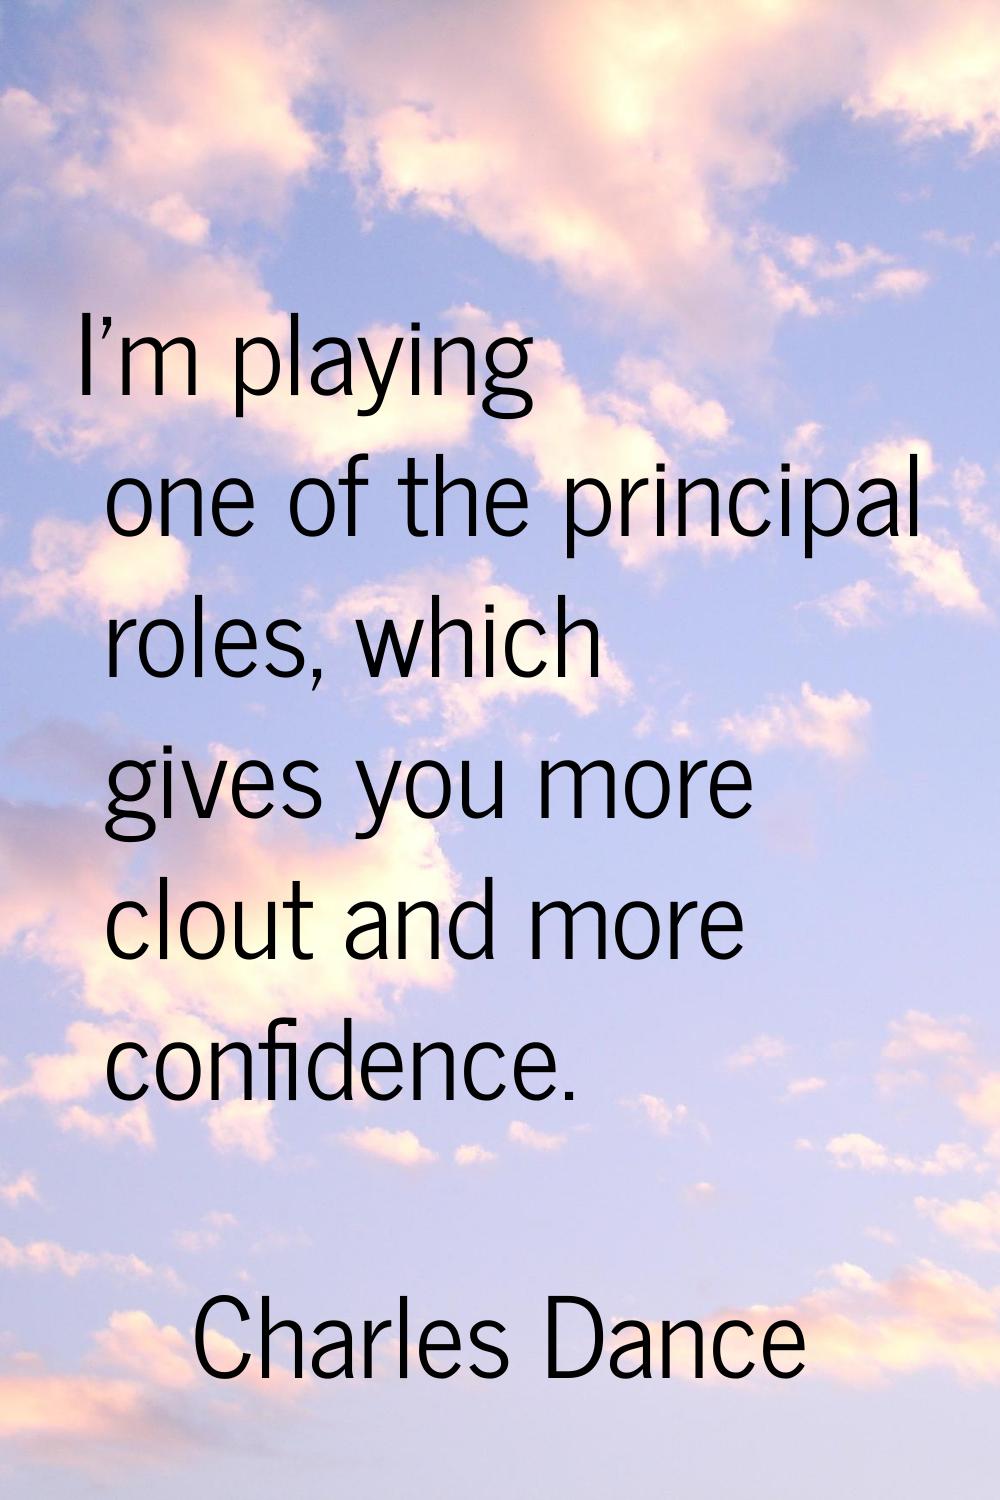 I'm playing one of the principal roles, which gives you more clout and more confidence.